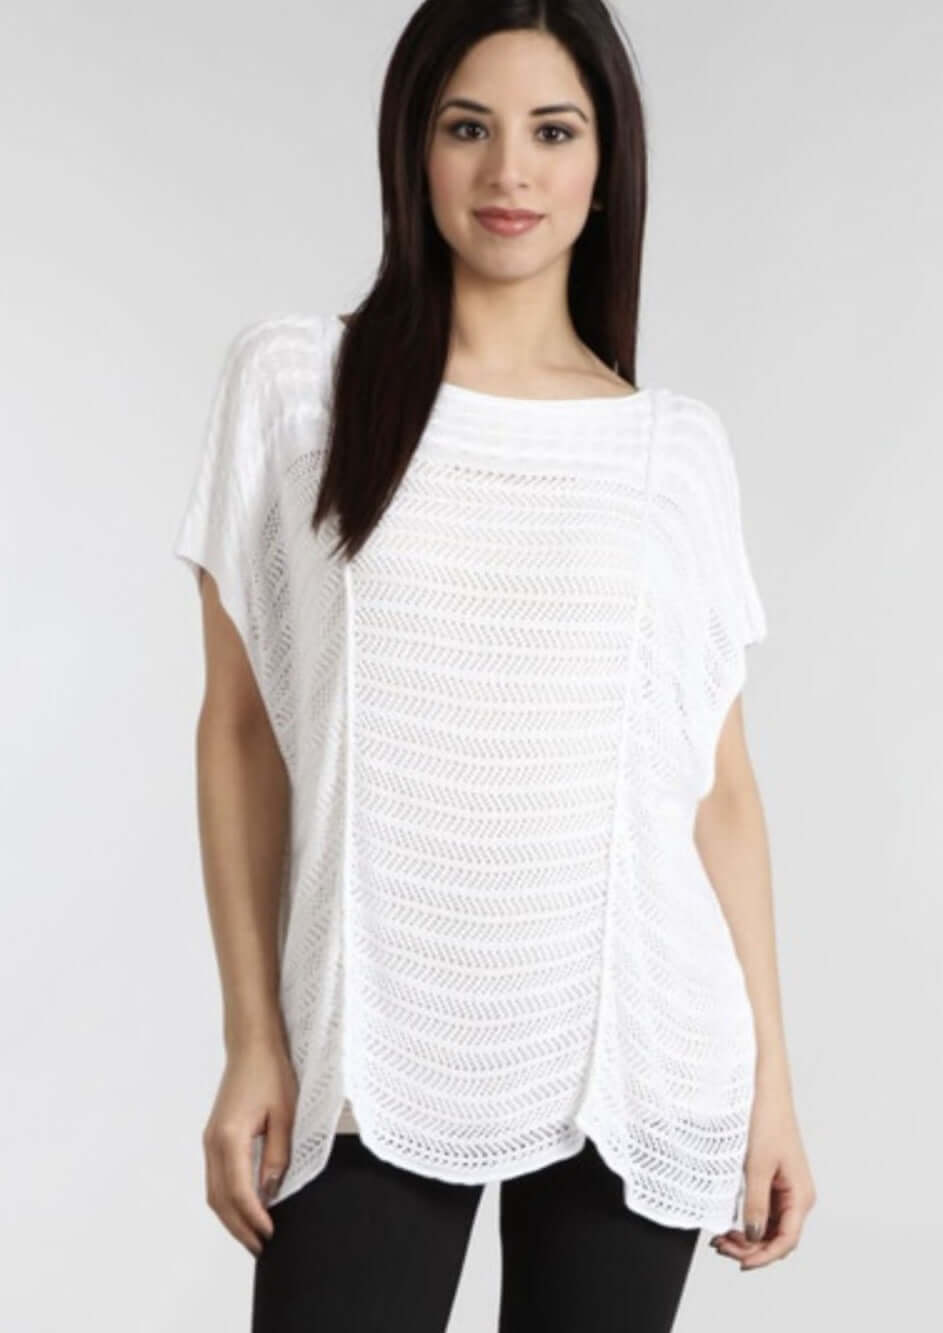 Made in USA Ladies Loose Knitted White Accent Top with Beautiful Crochet Detail | Classy Cozy Cool Women's Made in America Boutique